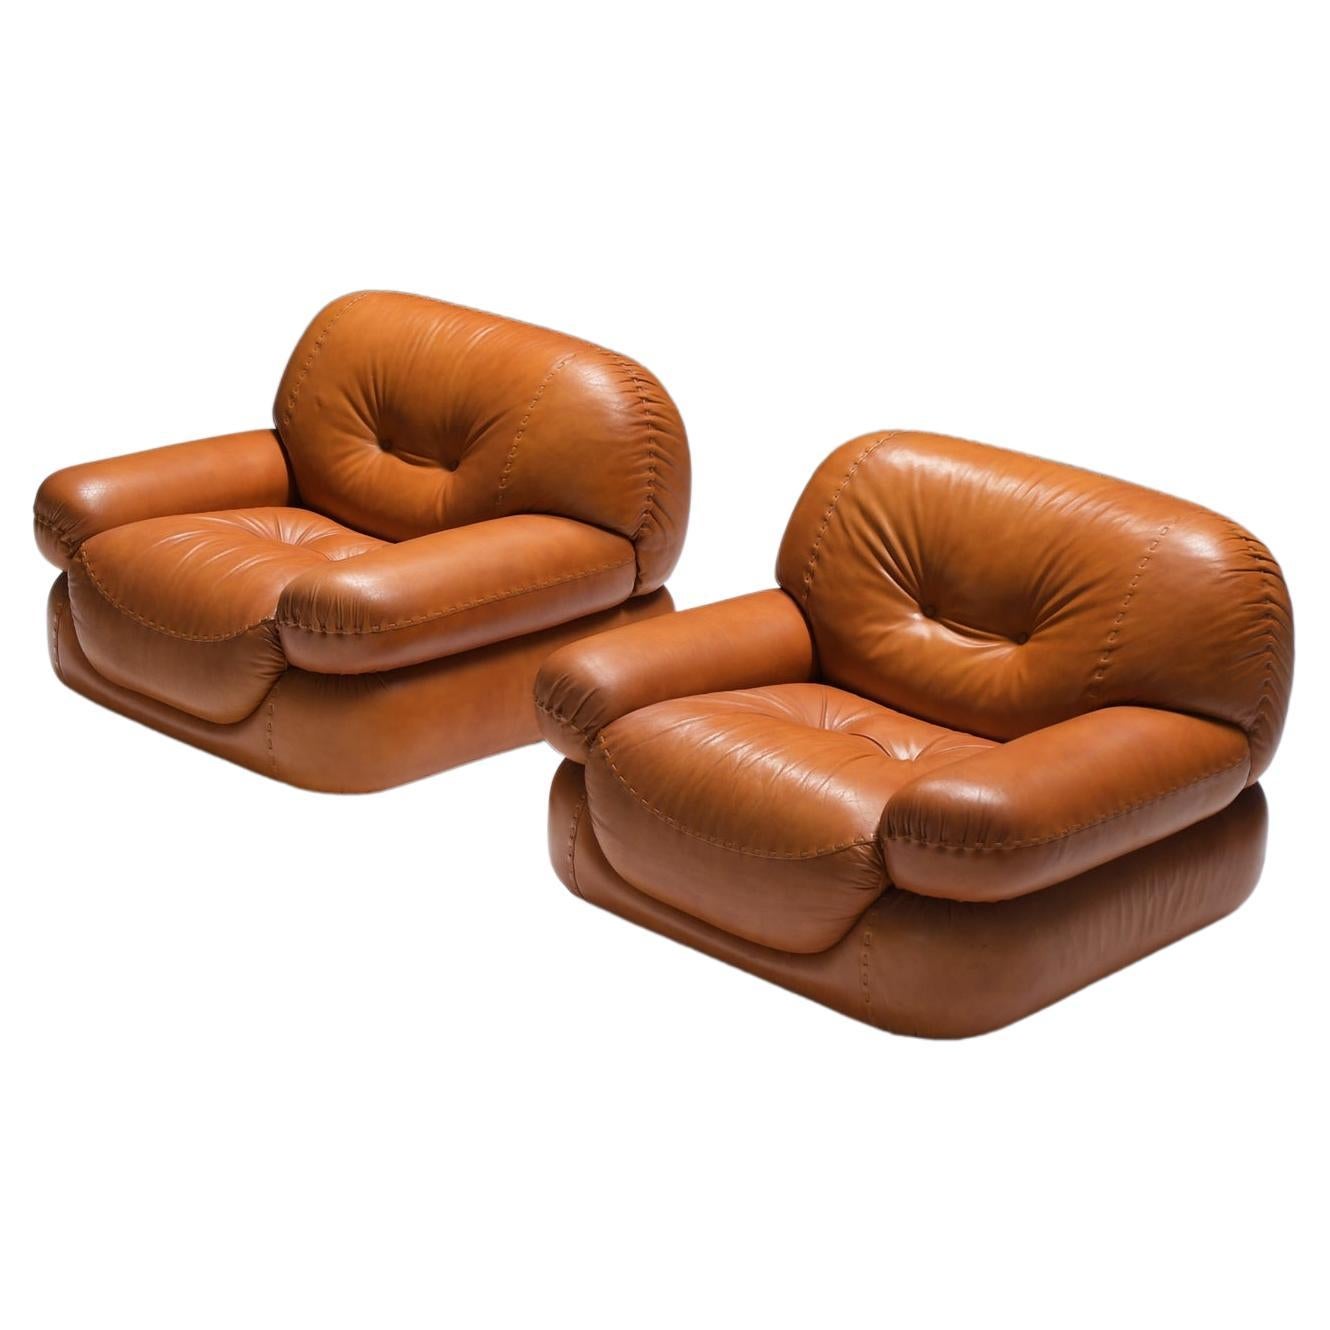 Italian lounge chairs in cognac chairs by Sapporo for Mobil Girgi Italy